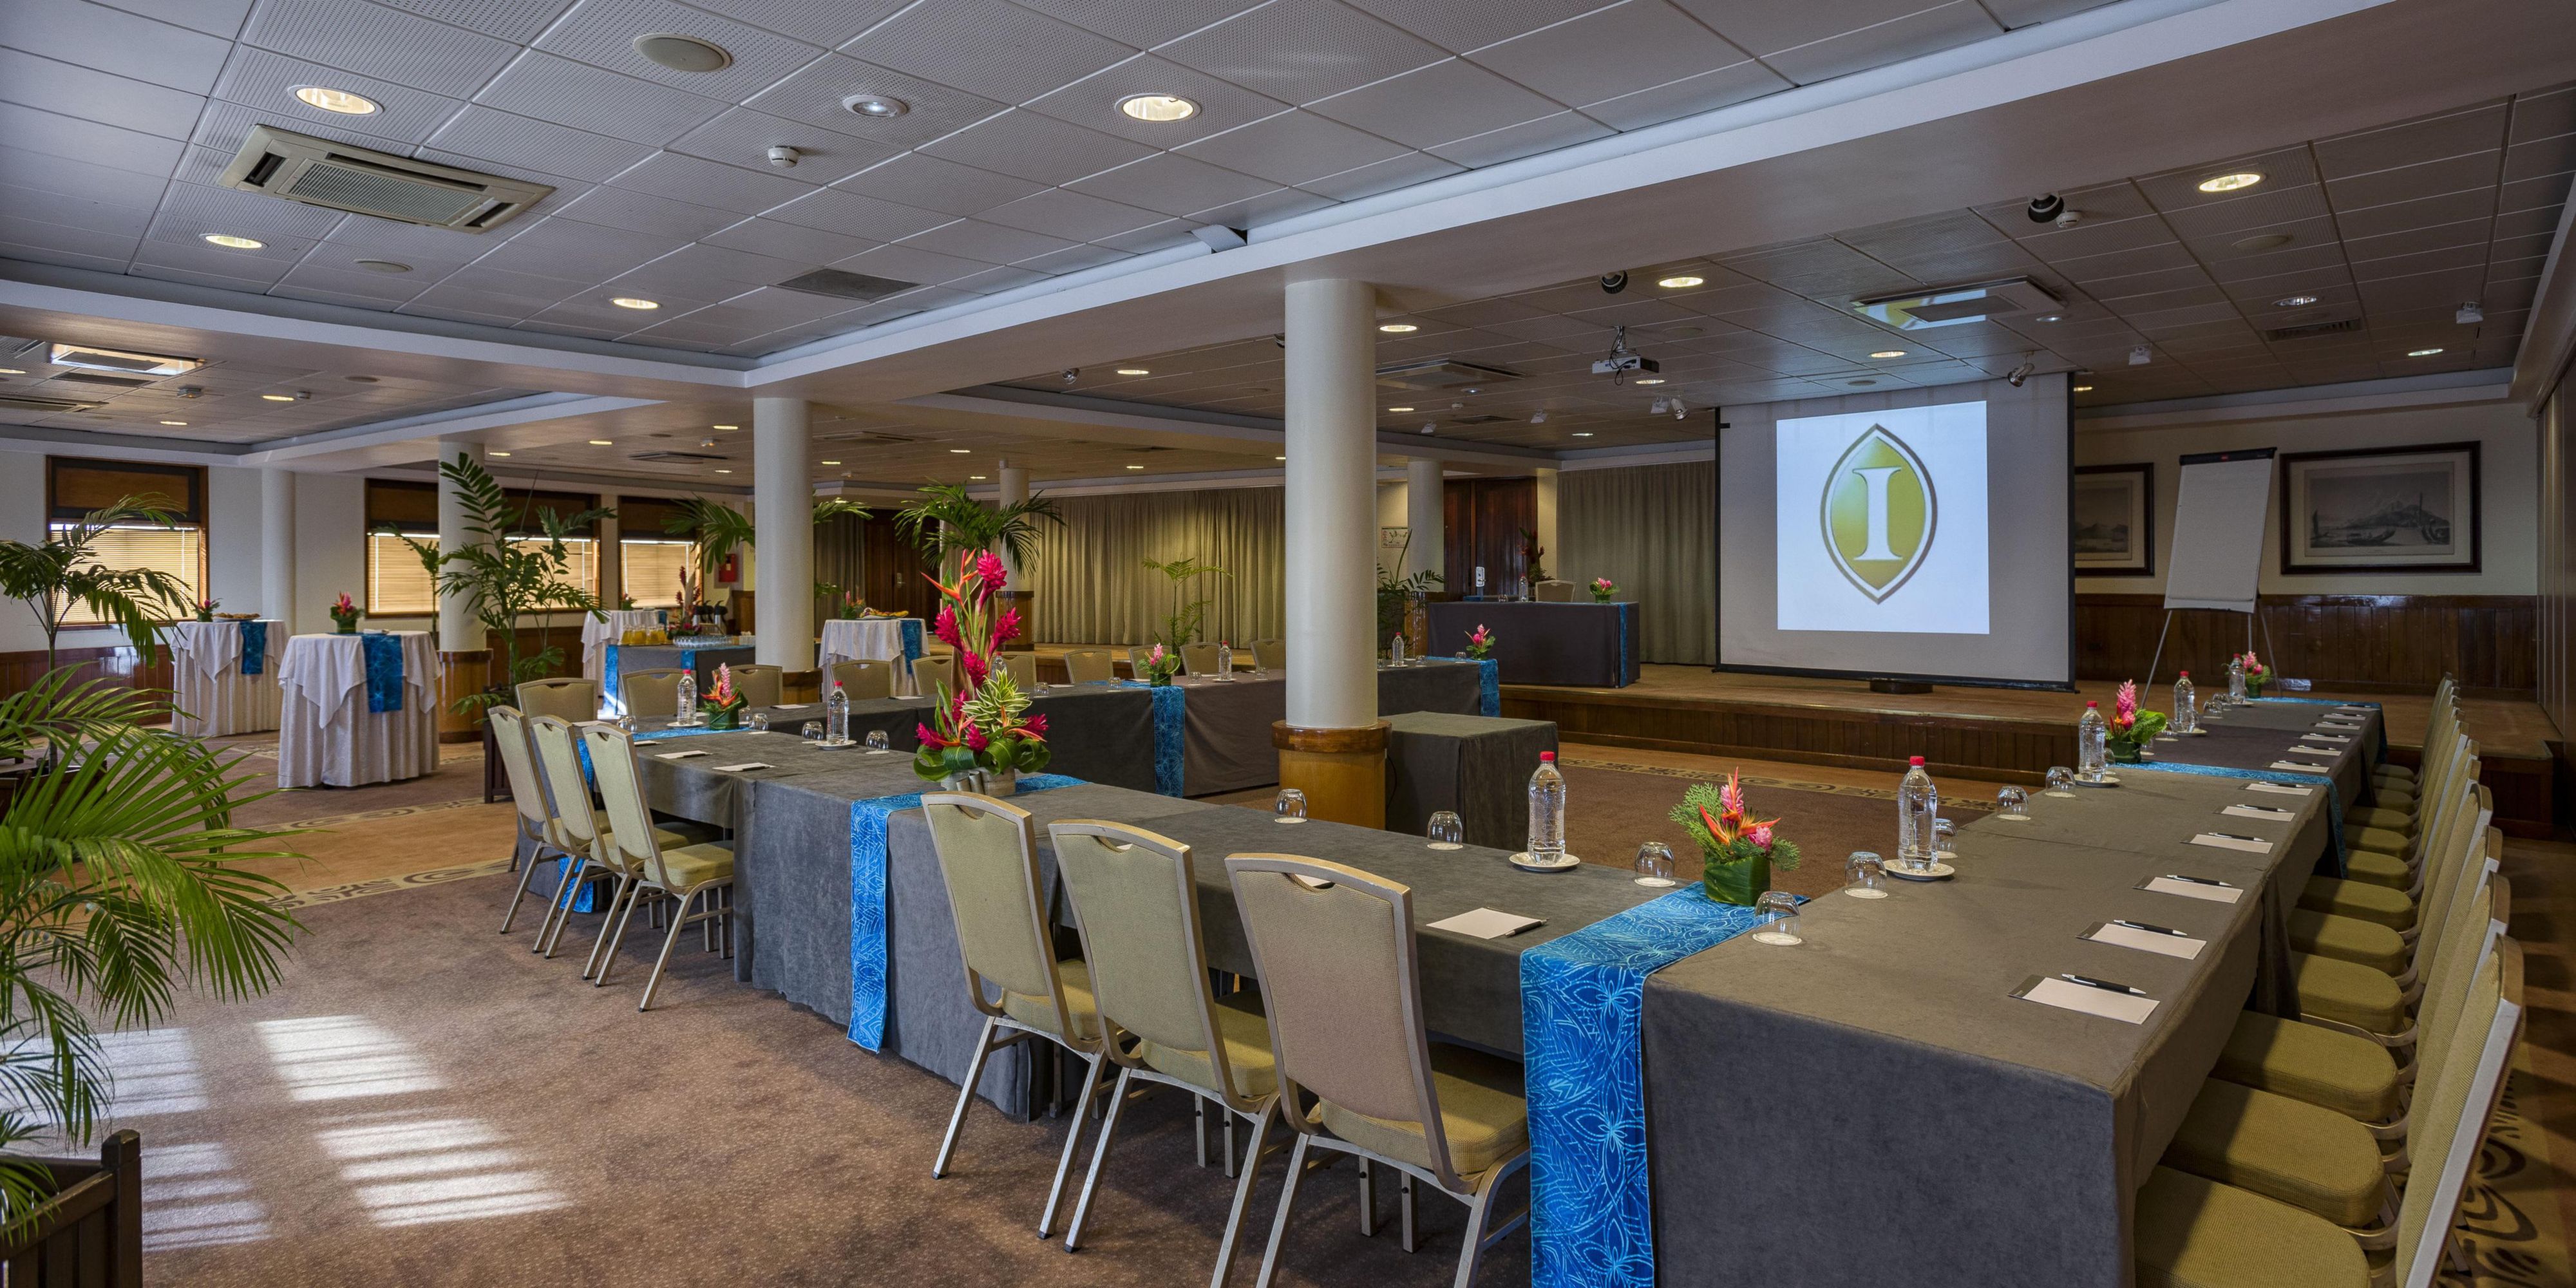 The InterContinental Tahiti Resort and Spa offers a host of fully serviced meetings as well as indoor and outdoor function rooms, flexible enough to host large meetings, wedding receptions, parties, conference and more. Let our team of experts plan the perfect event, grand or intimate.